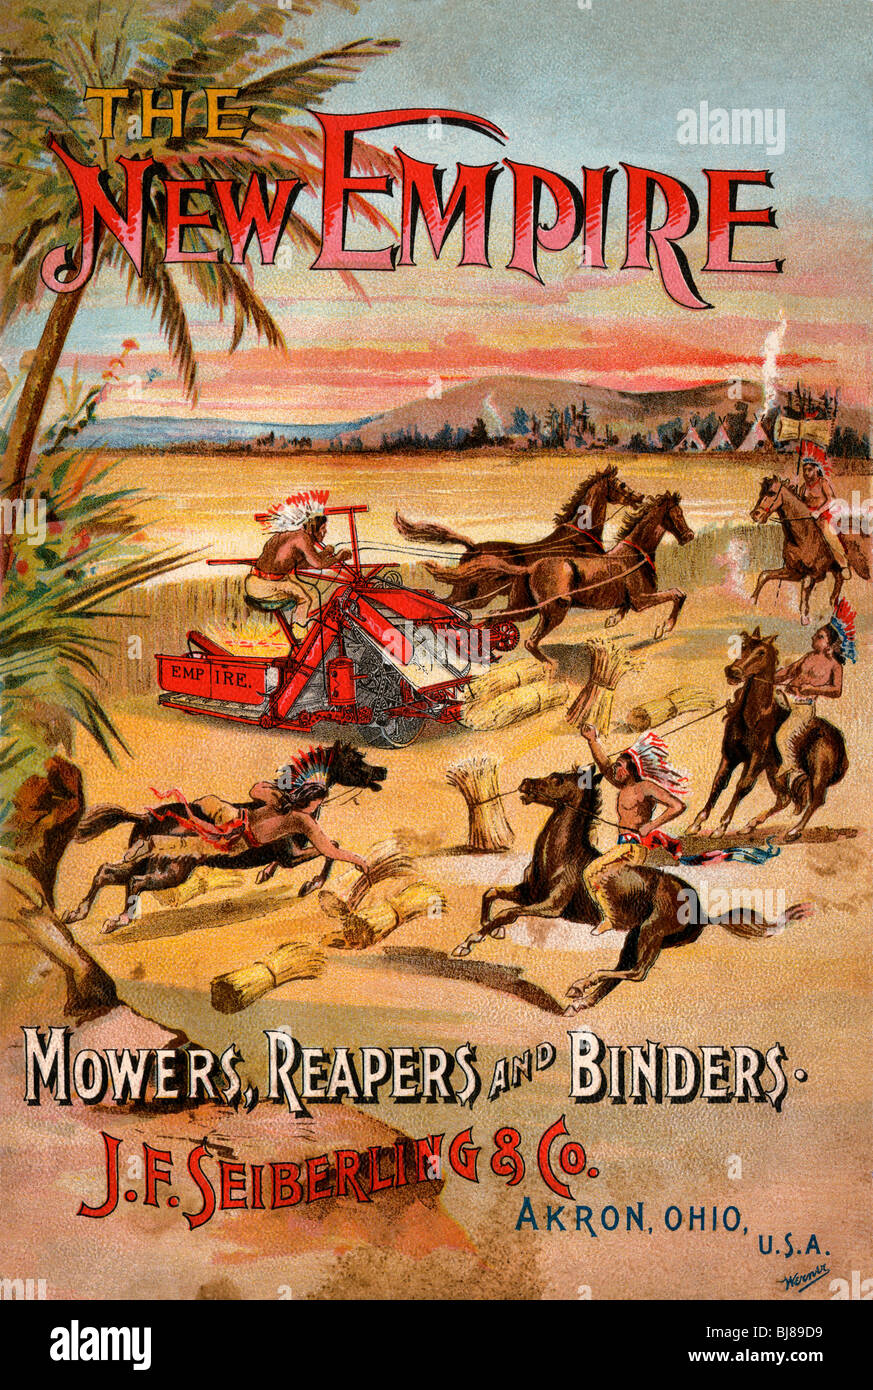 Promotional pamphlet for New Empire mowers, reapers, and binders, Seiberling & Co., Akron, Ohio, c. 1890. Color lithograph Stock Photo